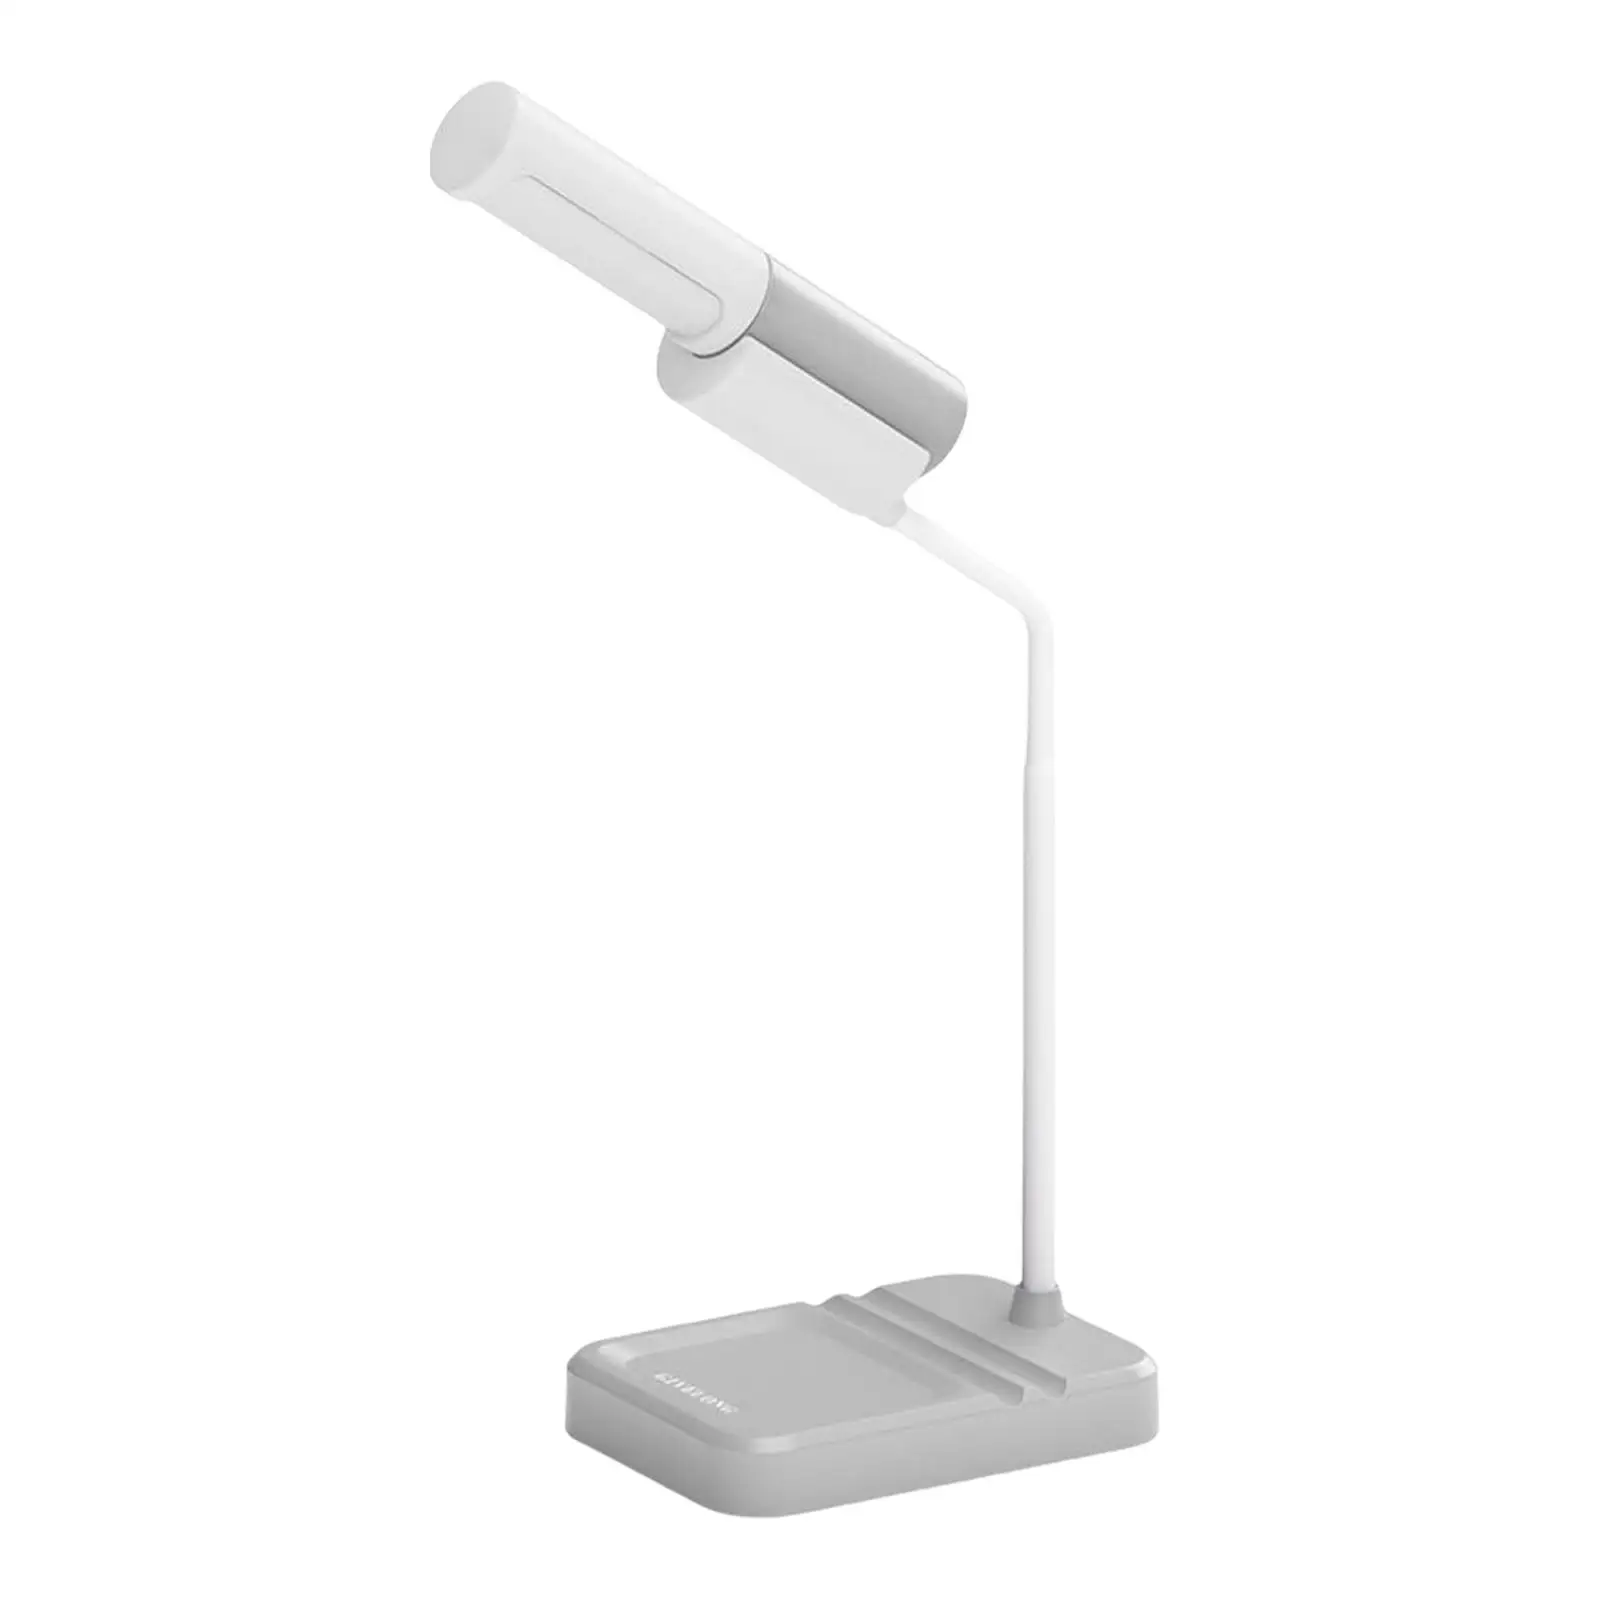 Dimmable Desk Lamp Table Light USB Rechargeable Eye Caring Detachable Flashlight Night Light for Office Bedroom Bedside Home